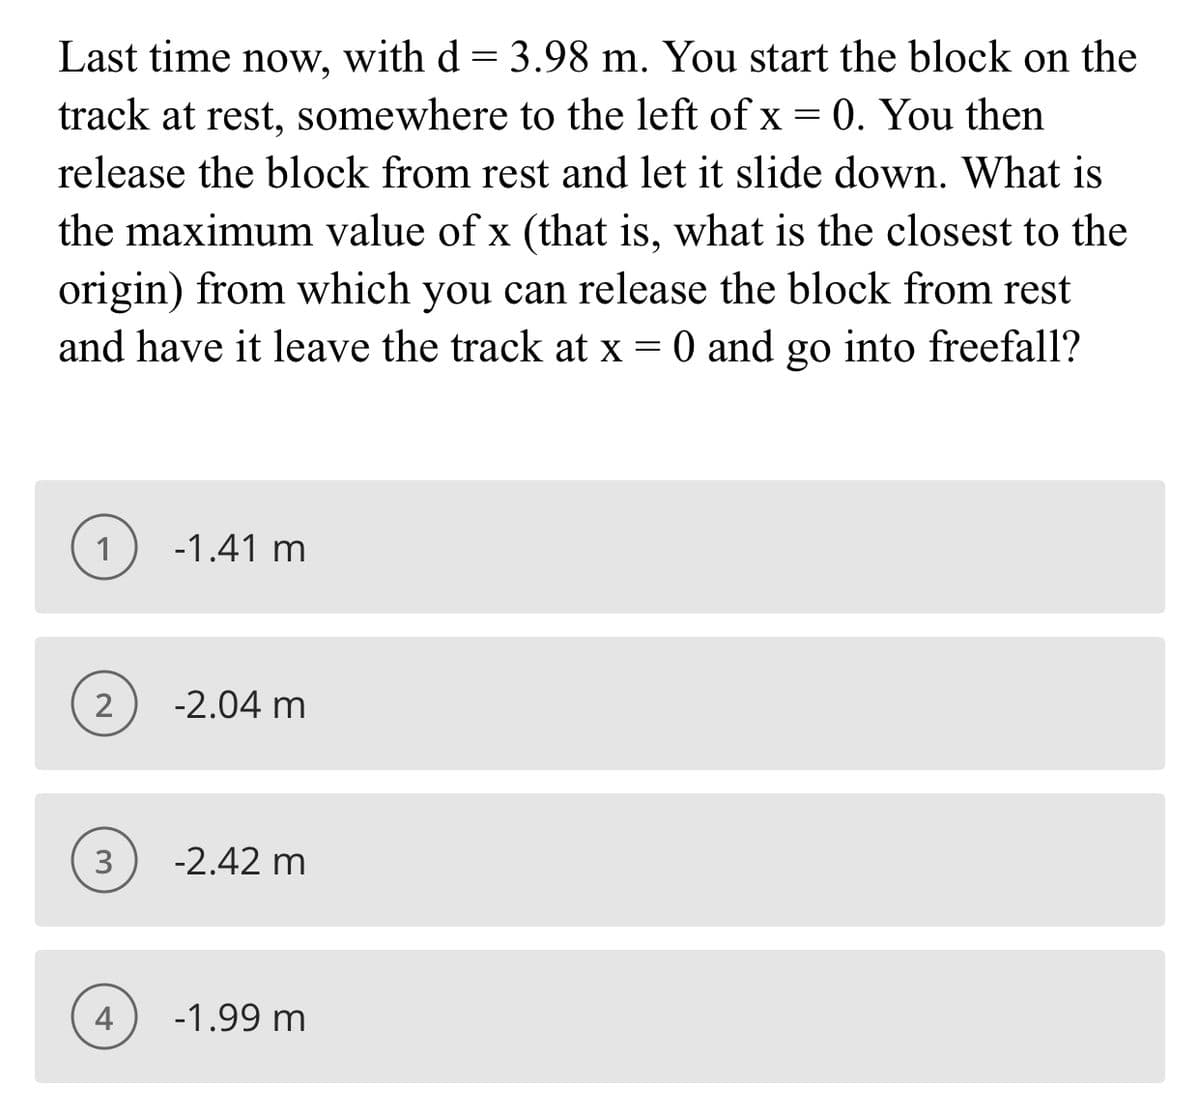 Last time now, with d = 3.98 m. You start the block on the
track at rest, somewhere to the left of x = 0. You then
release the block from rest and let it slide down. What is
the maximum value of x (that is, what is the closest to the
origin) from which you can release the block from rest
and have it leave the track at x = 0 and go into freefall?
1
-1.41 m
2
-2.04 m
3
-2.42 m
4
-1.99 m
